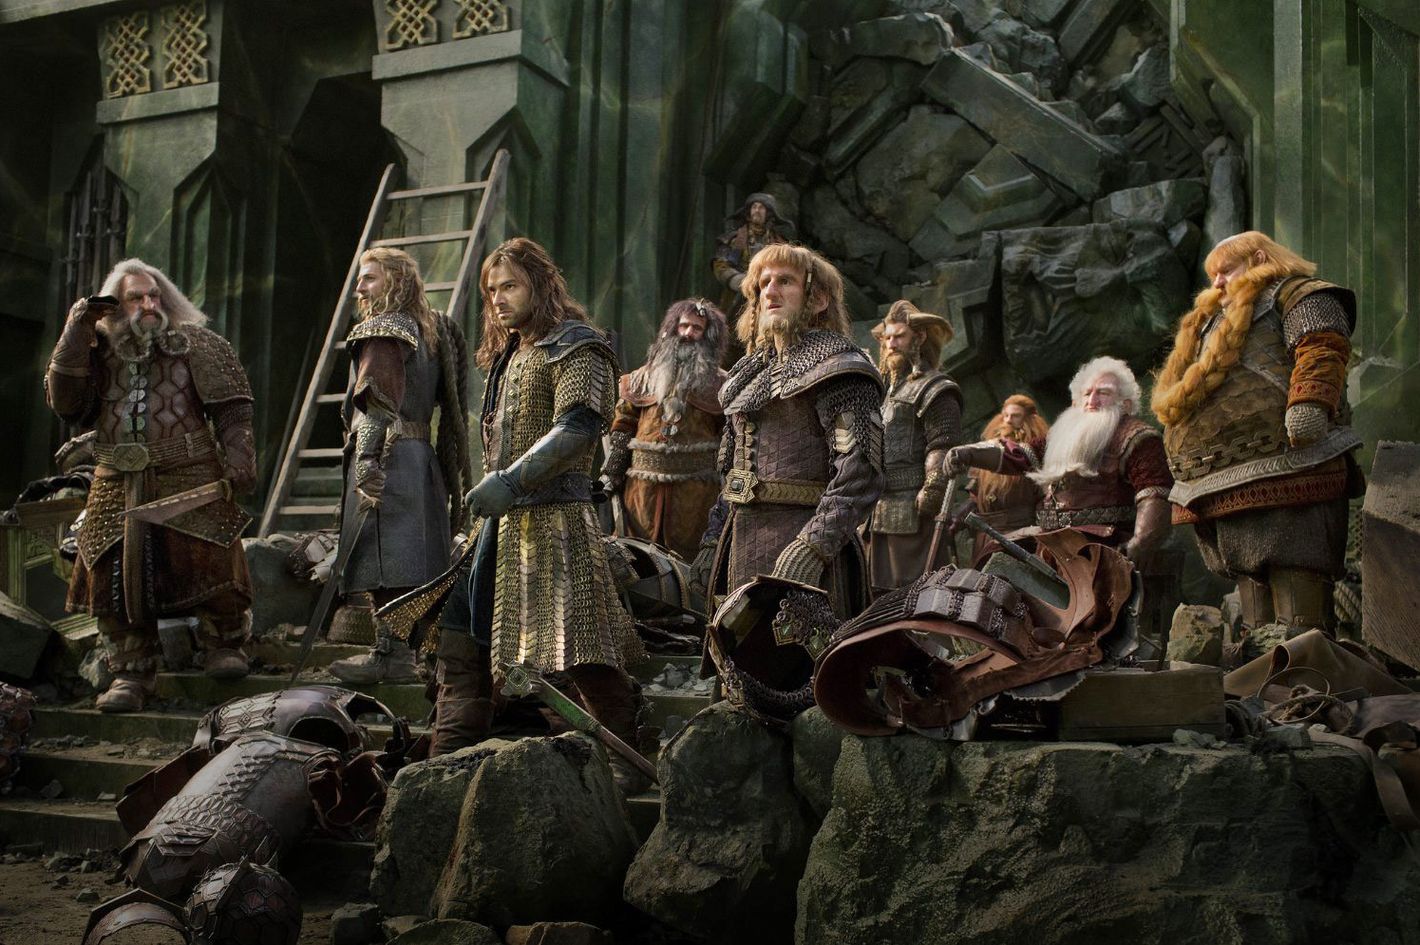 The Hobbit The Battle Of The Five Armies Is Final Proof That Peter Jackson Has Lost His Soul